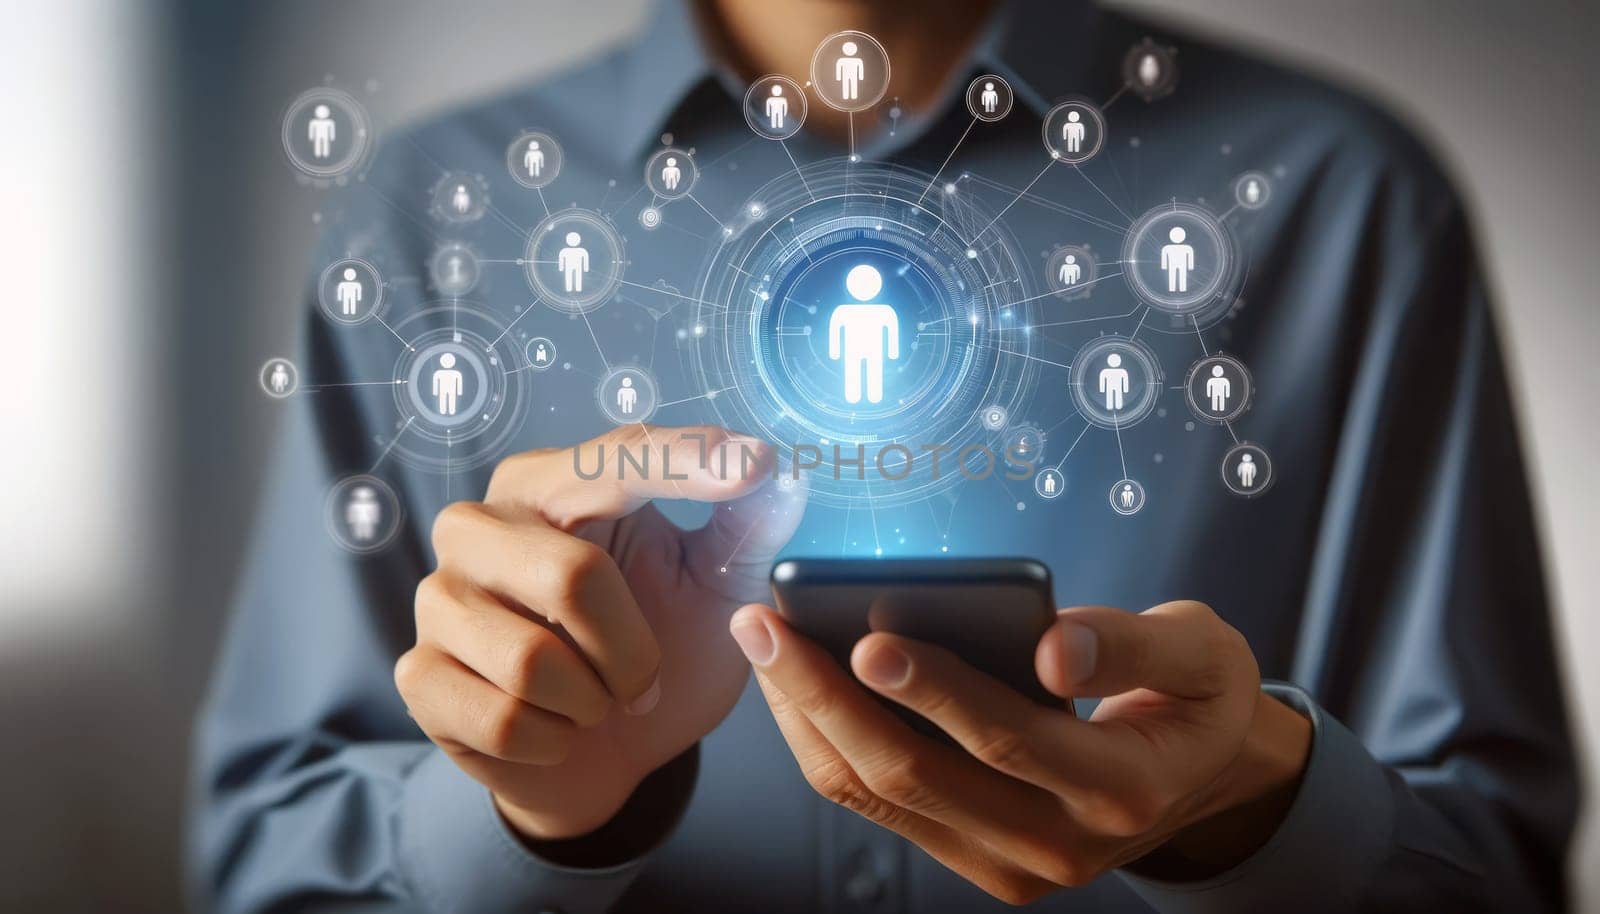 A person uses a smartphone, which projects a network of connected human icons, symbolizing the expansion of social networking through advanced technology